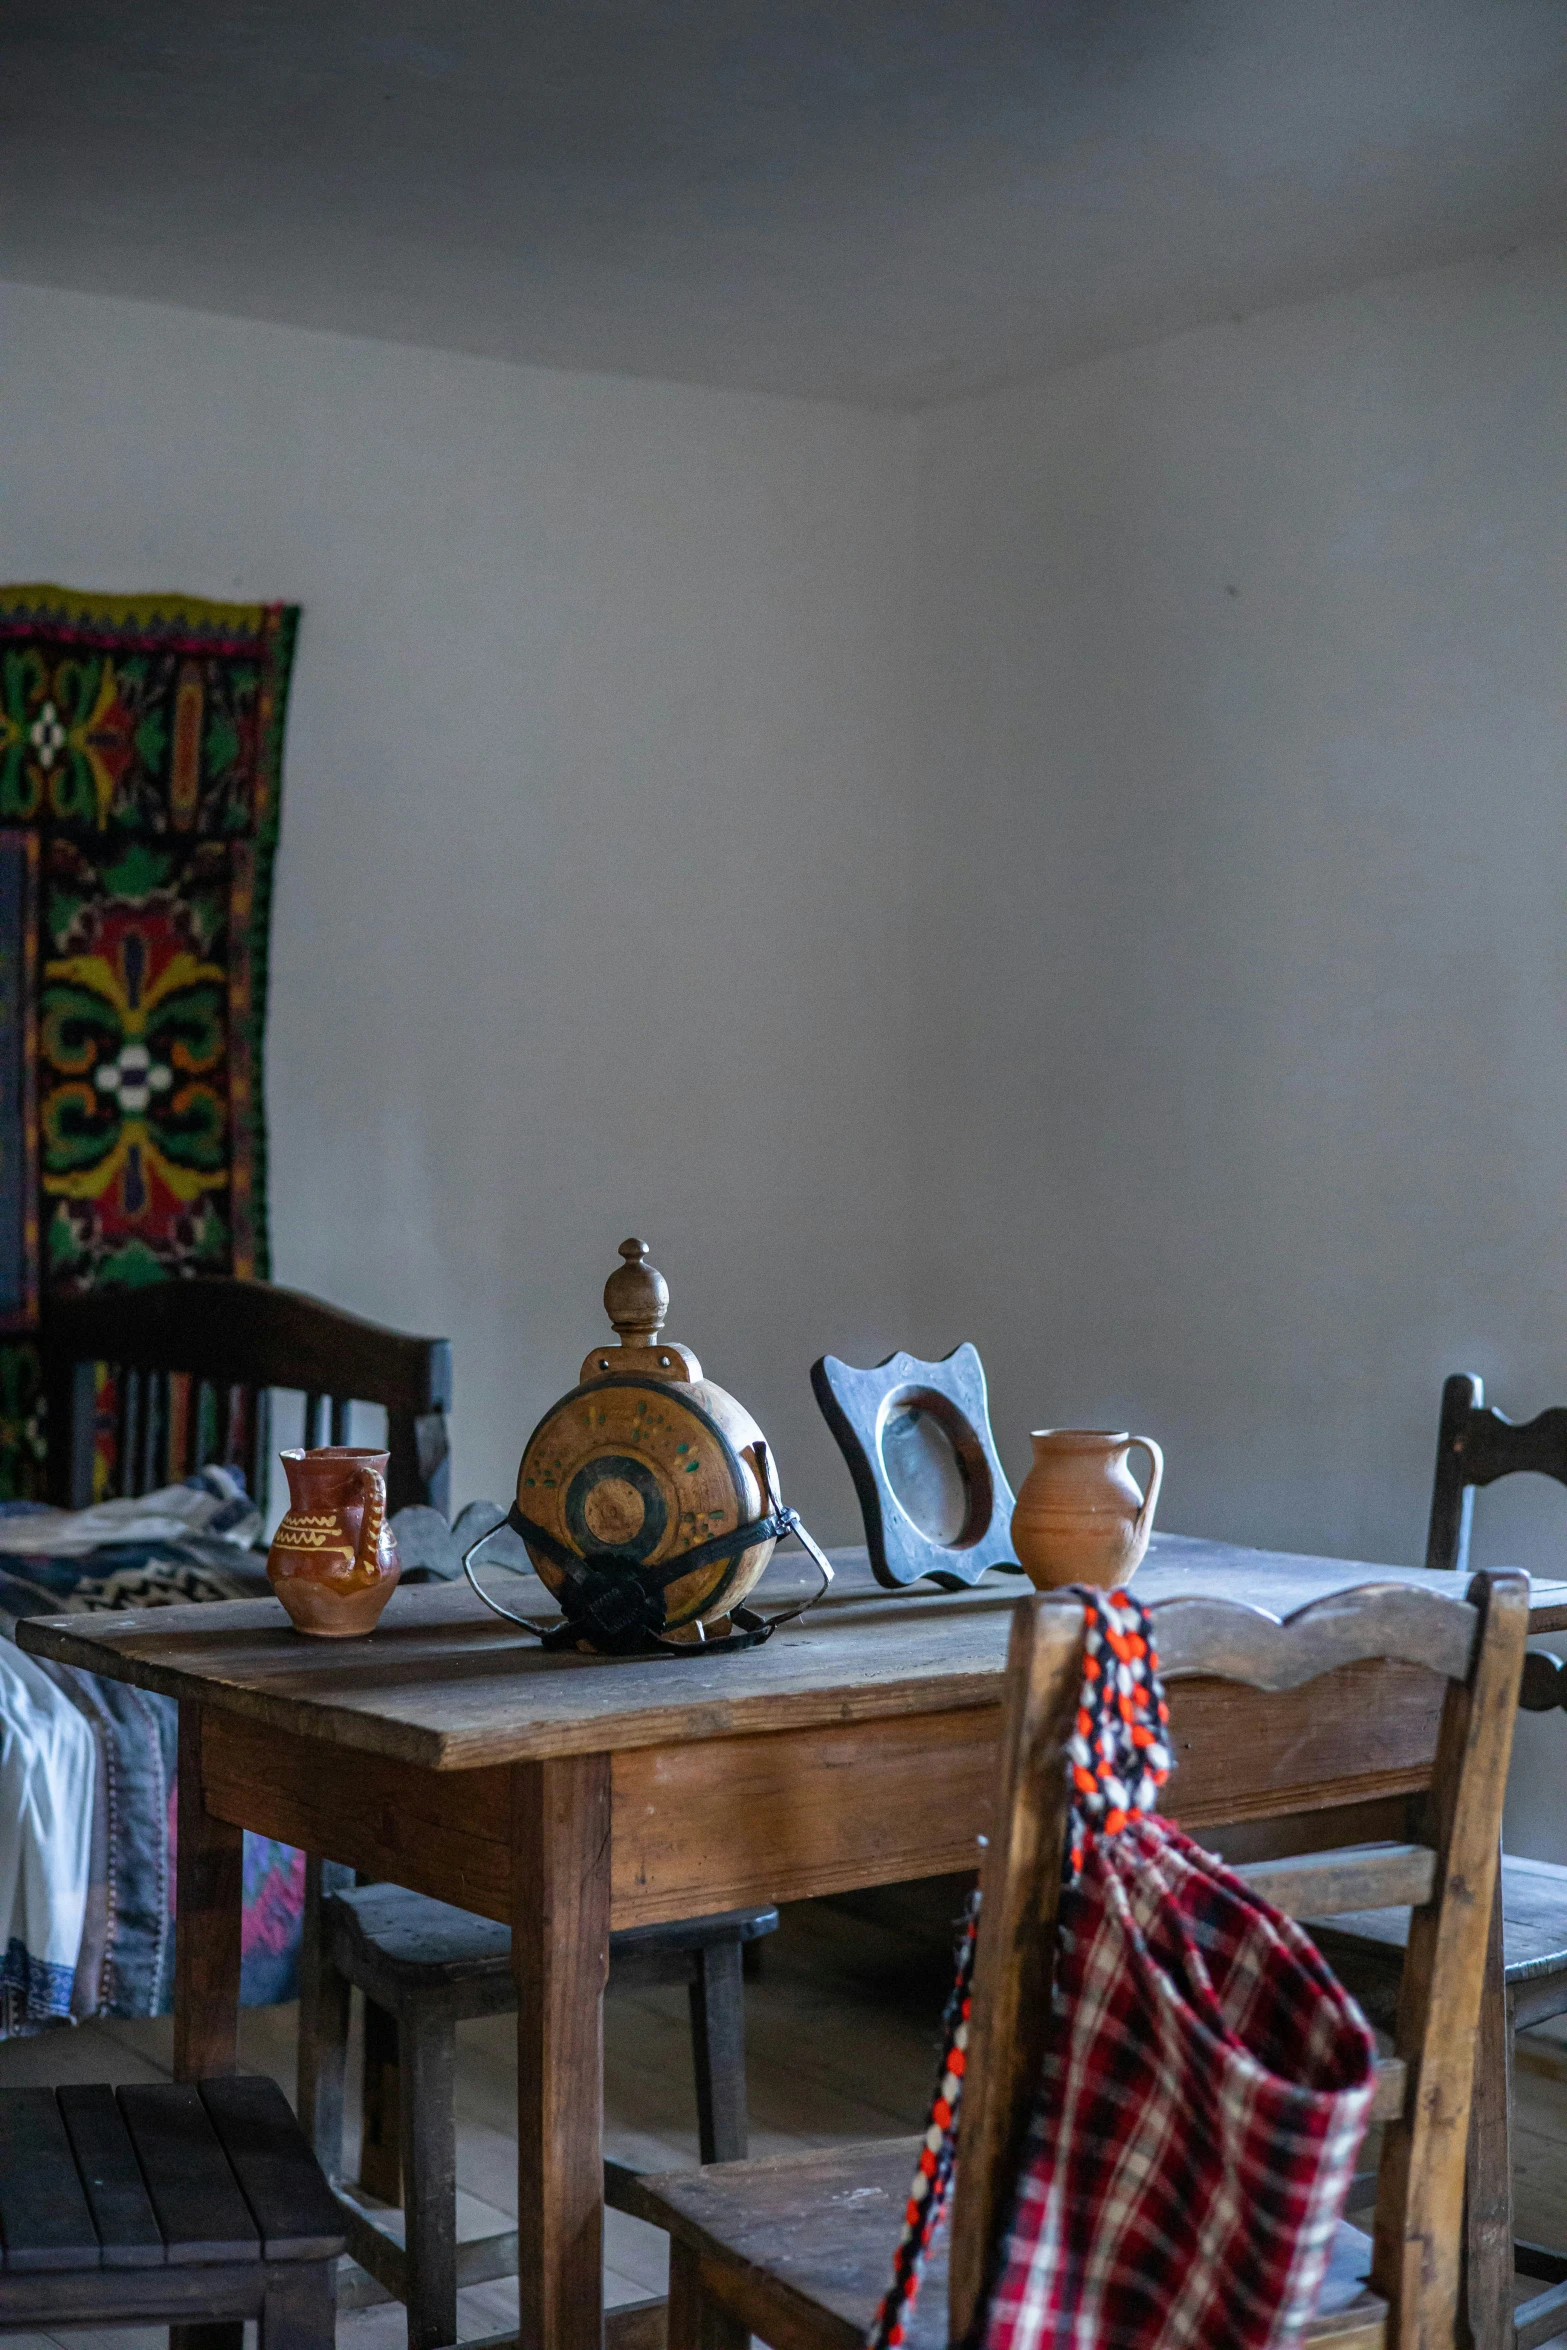 a small wooden table next to a chair and some kind of tapestry